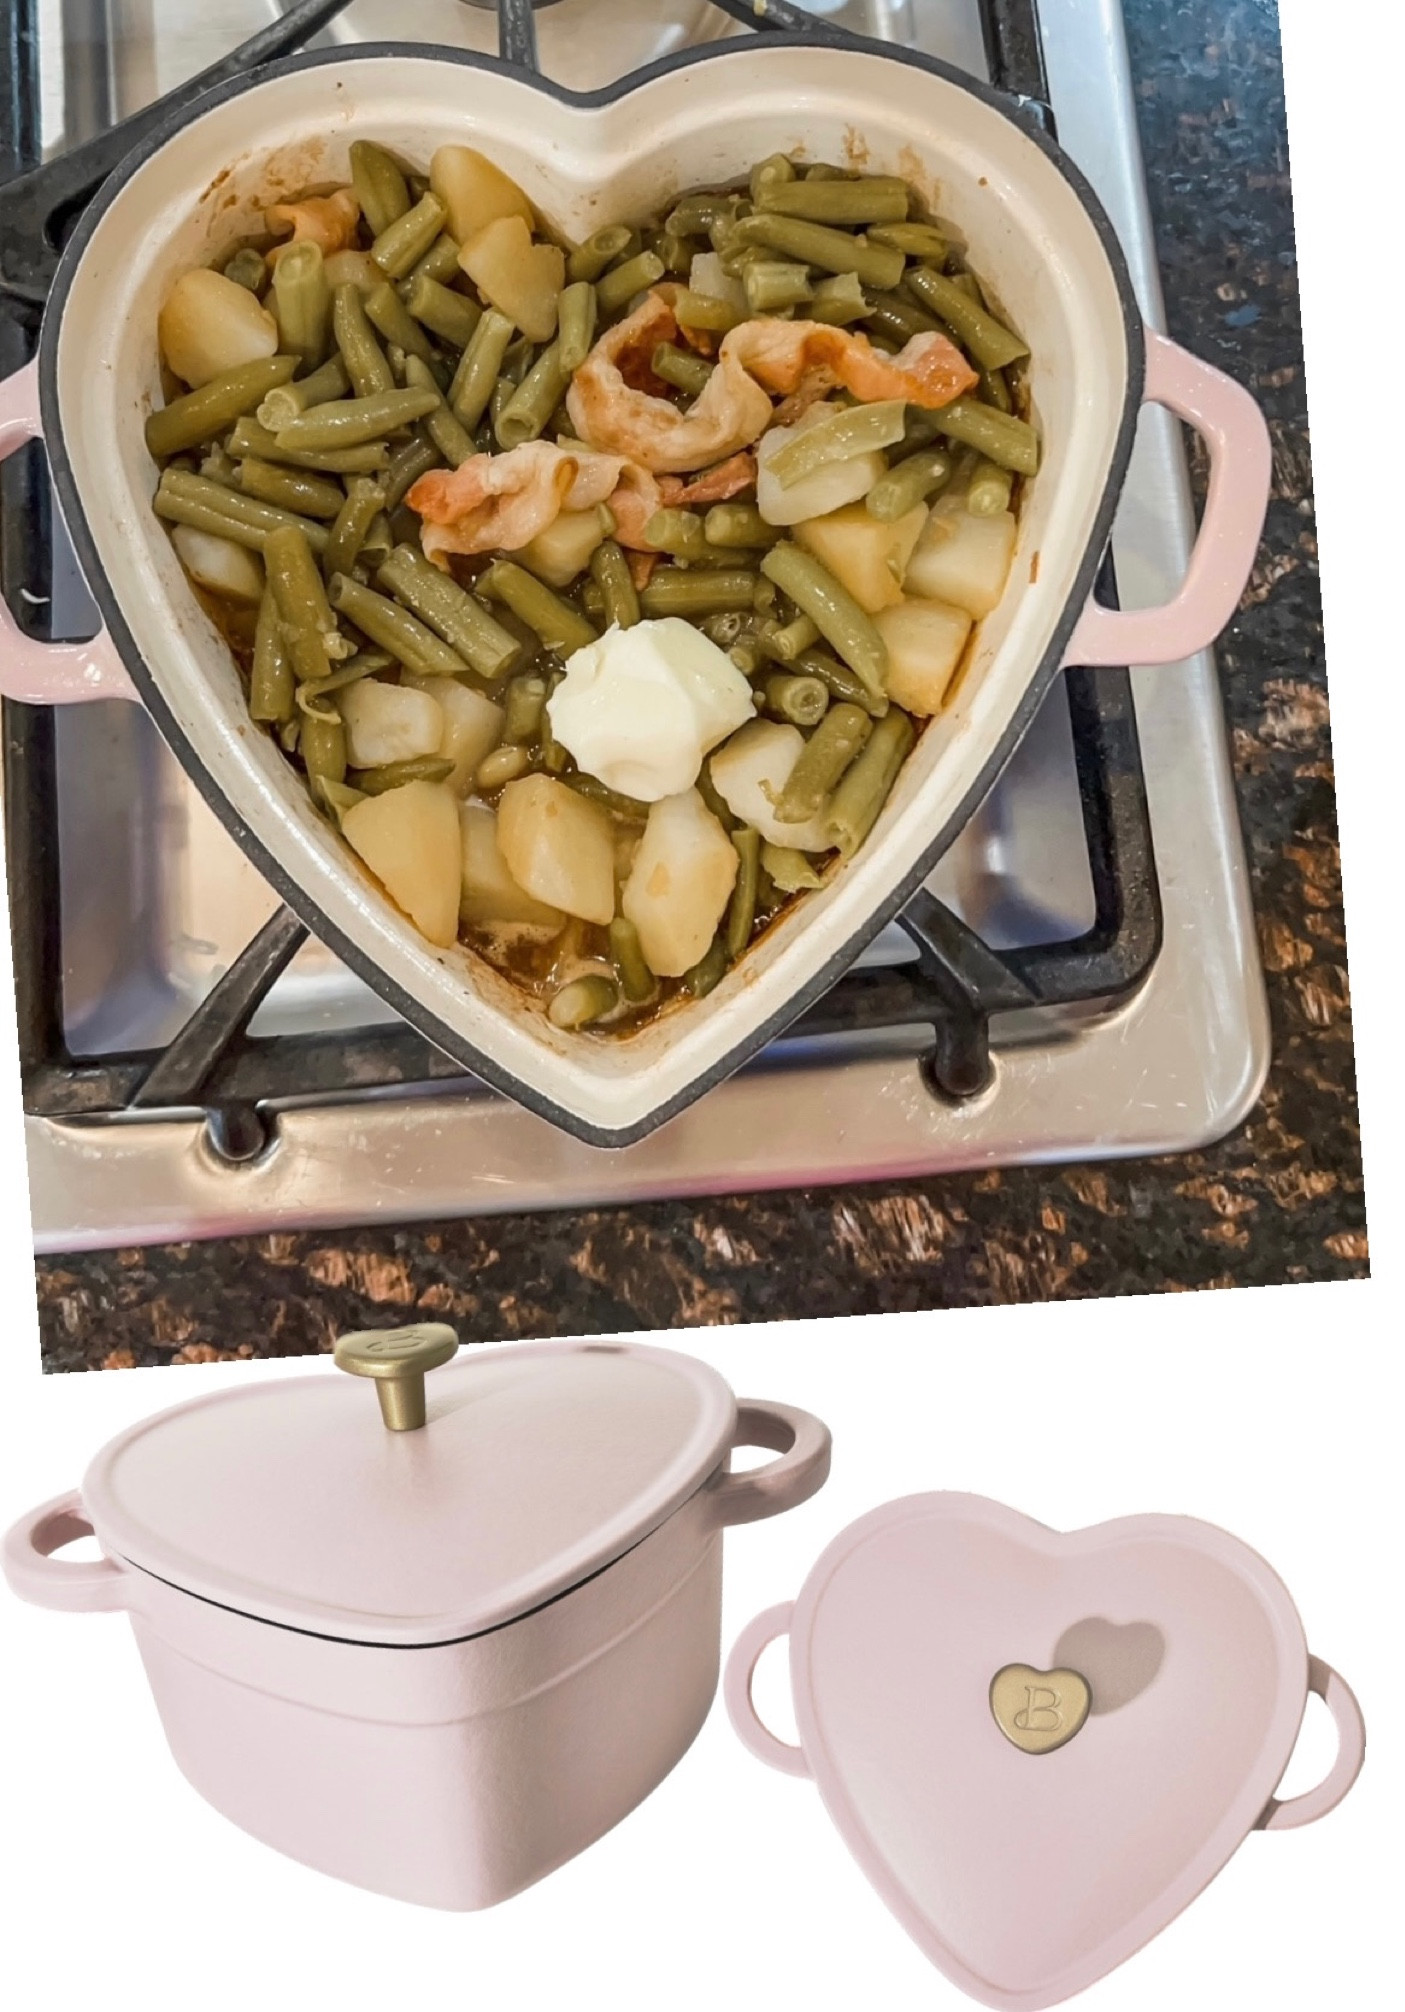 Beautiful 2 qt Slow Cooker Set, … curated on LTK